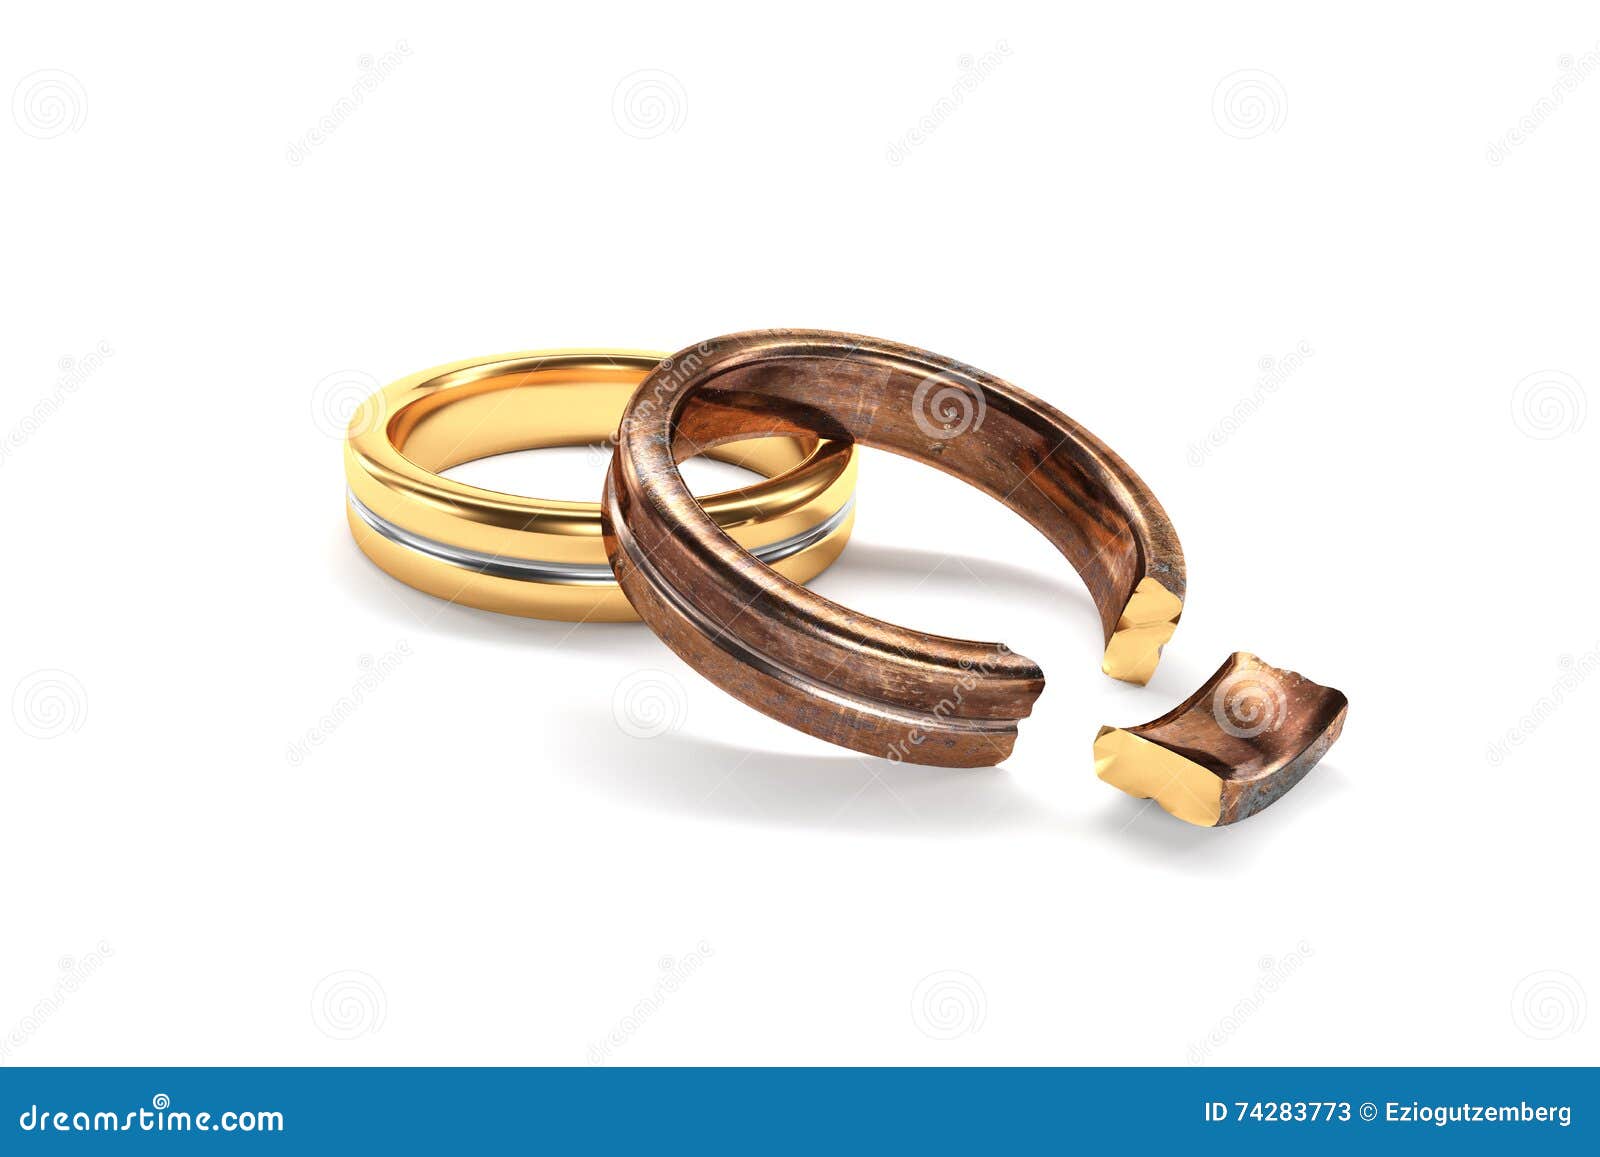  Wedding  Rings  Symbolizing The Divorce  Between Two People 